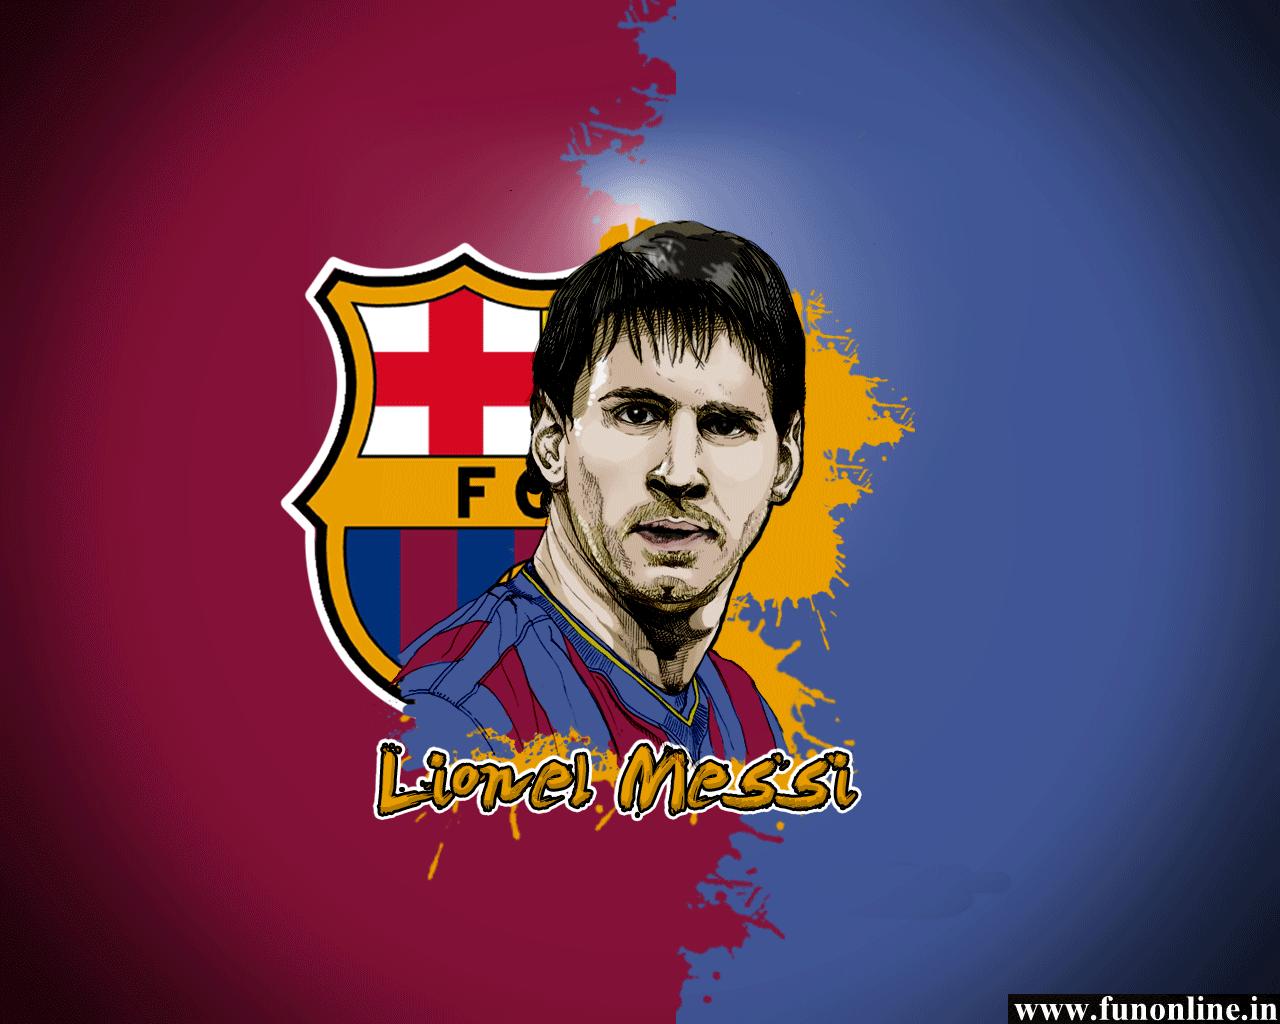 Free Download Lionel Messi Wallpapers Download Amazing Lionel Messi Hd Wallpaper [1280x1024] For